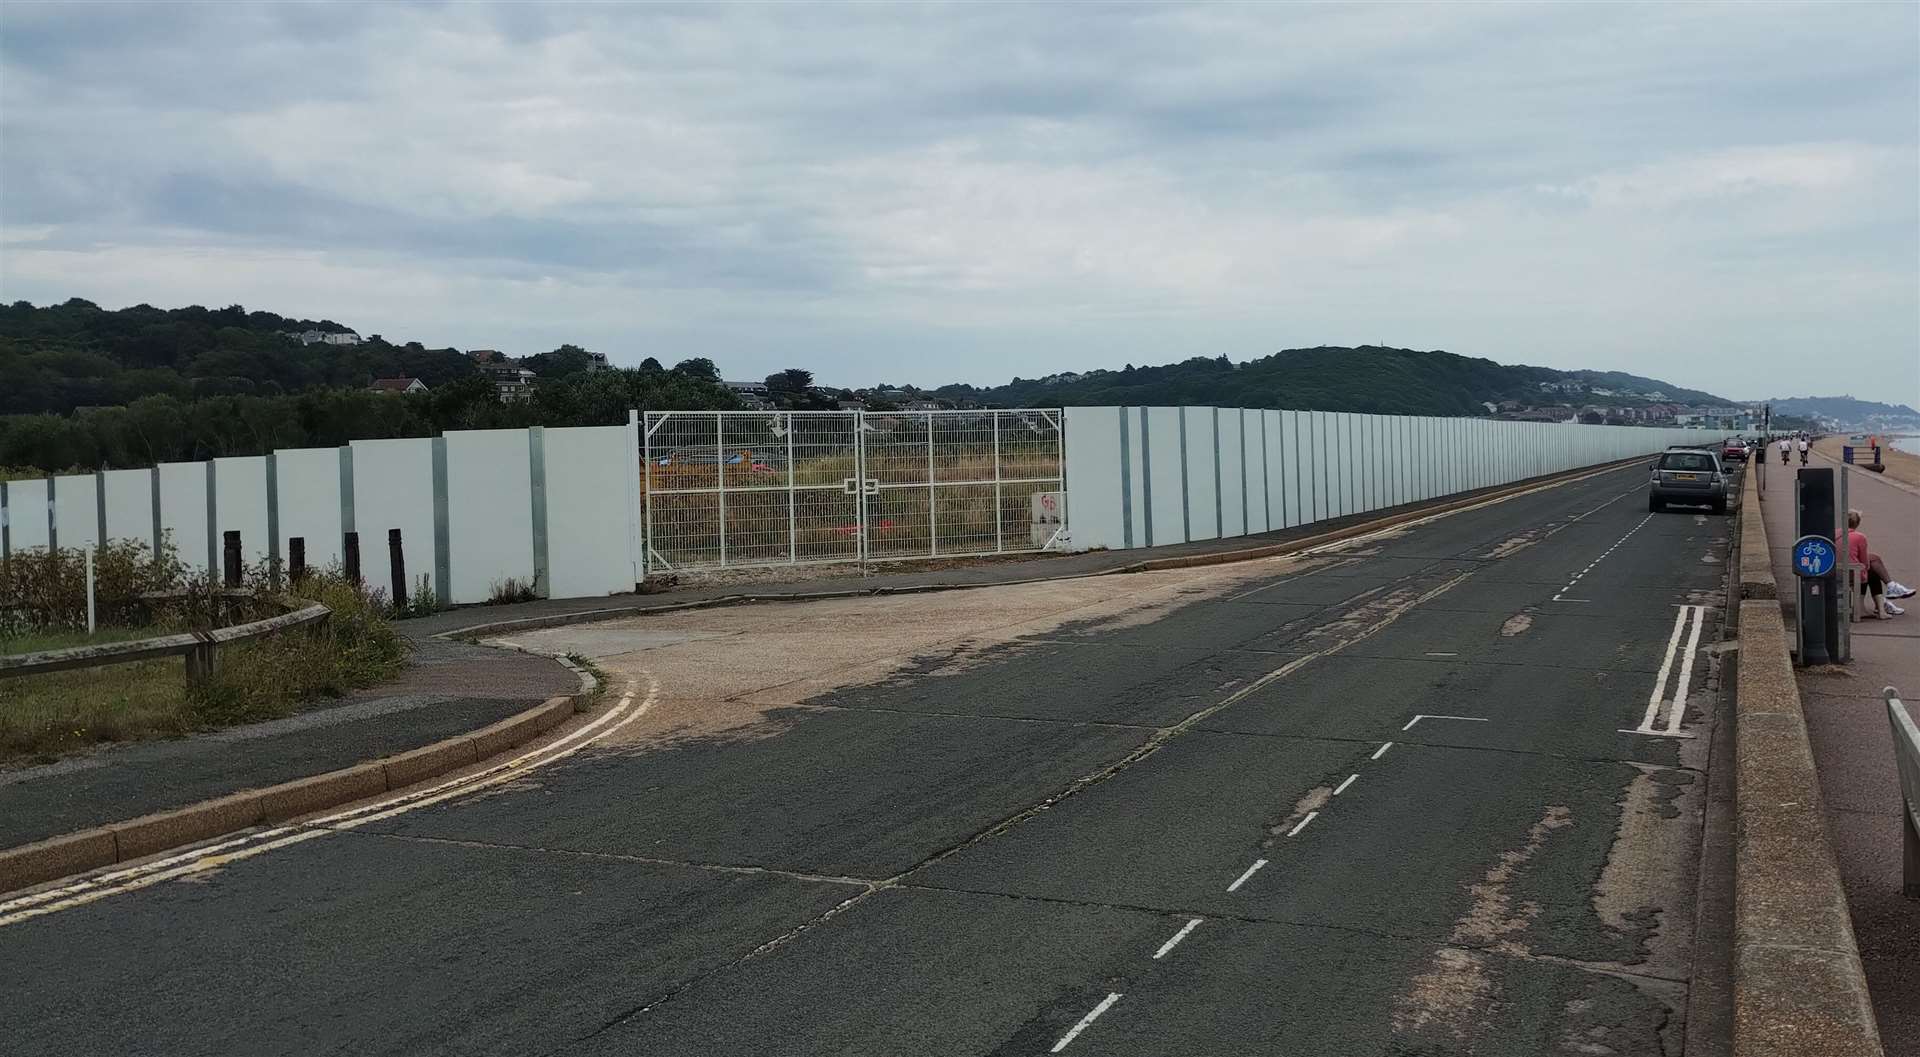 Hoardings around the Princes Parade site cost £300,000 to install